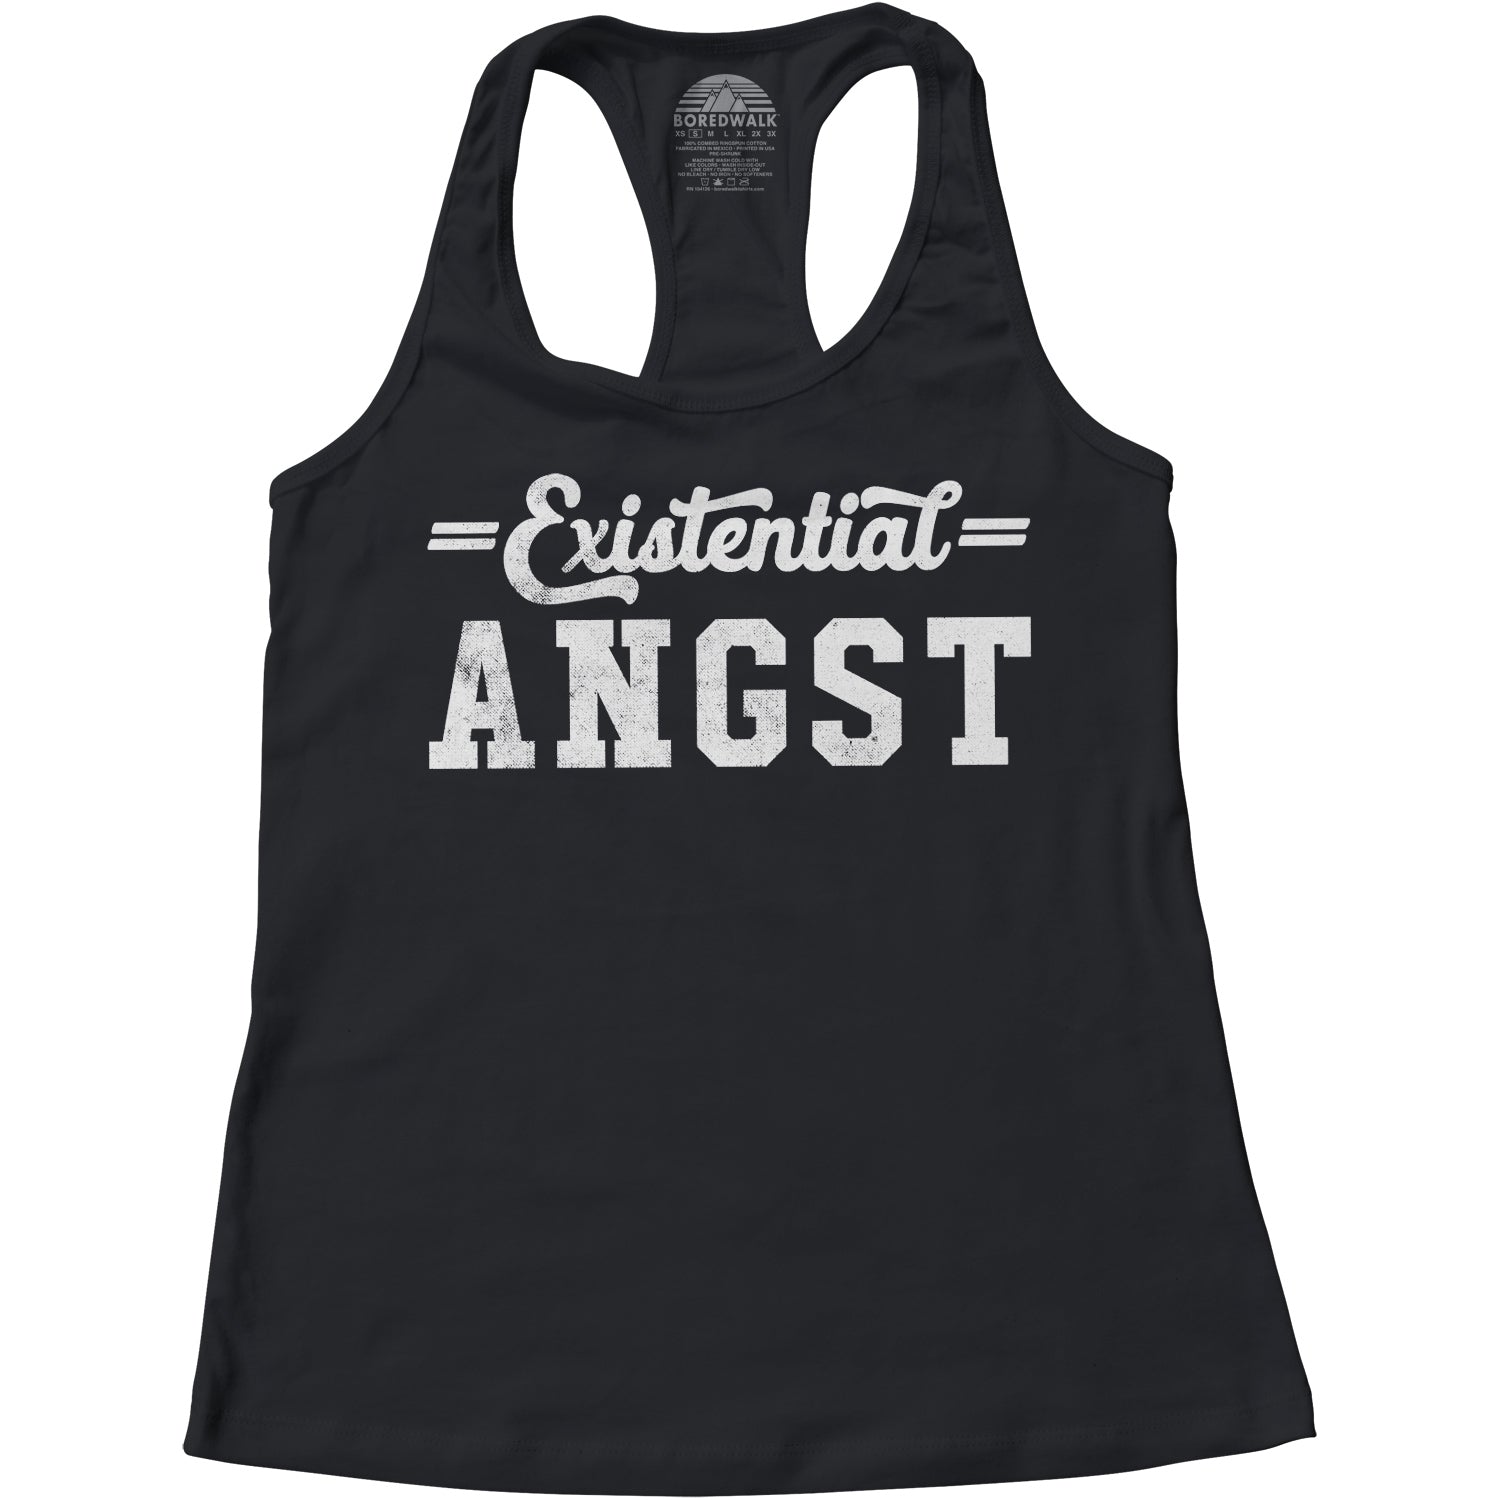 Women's Existential Angst Racerback Tank Top